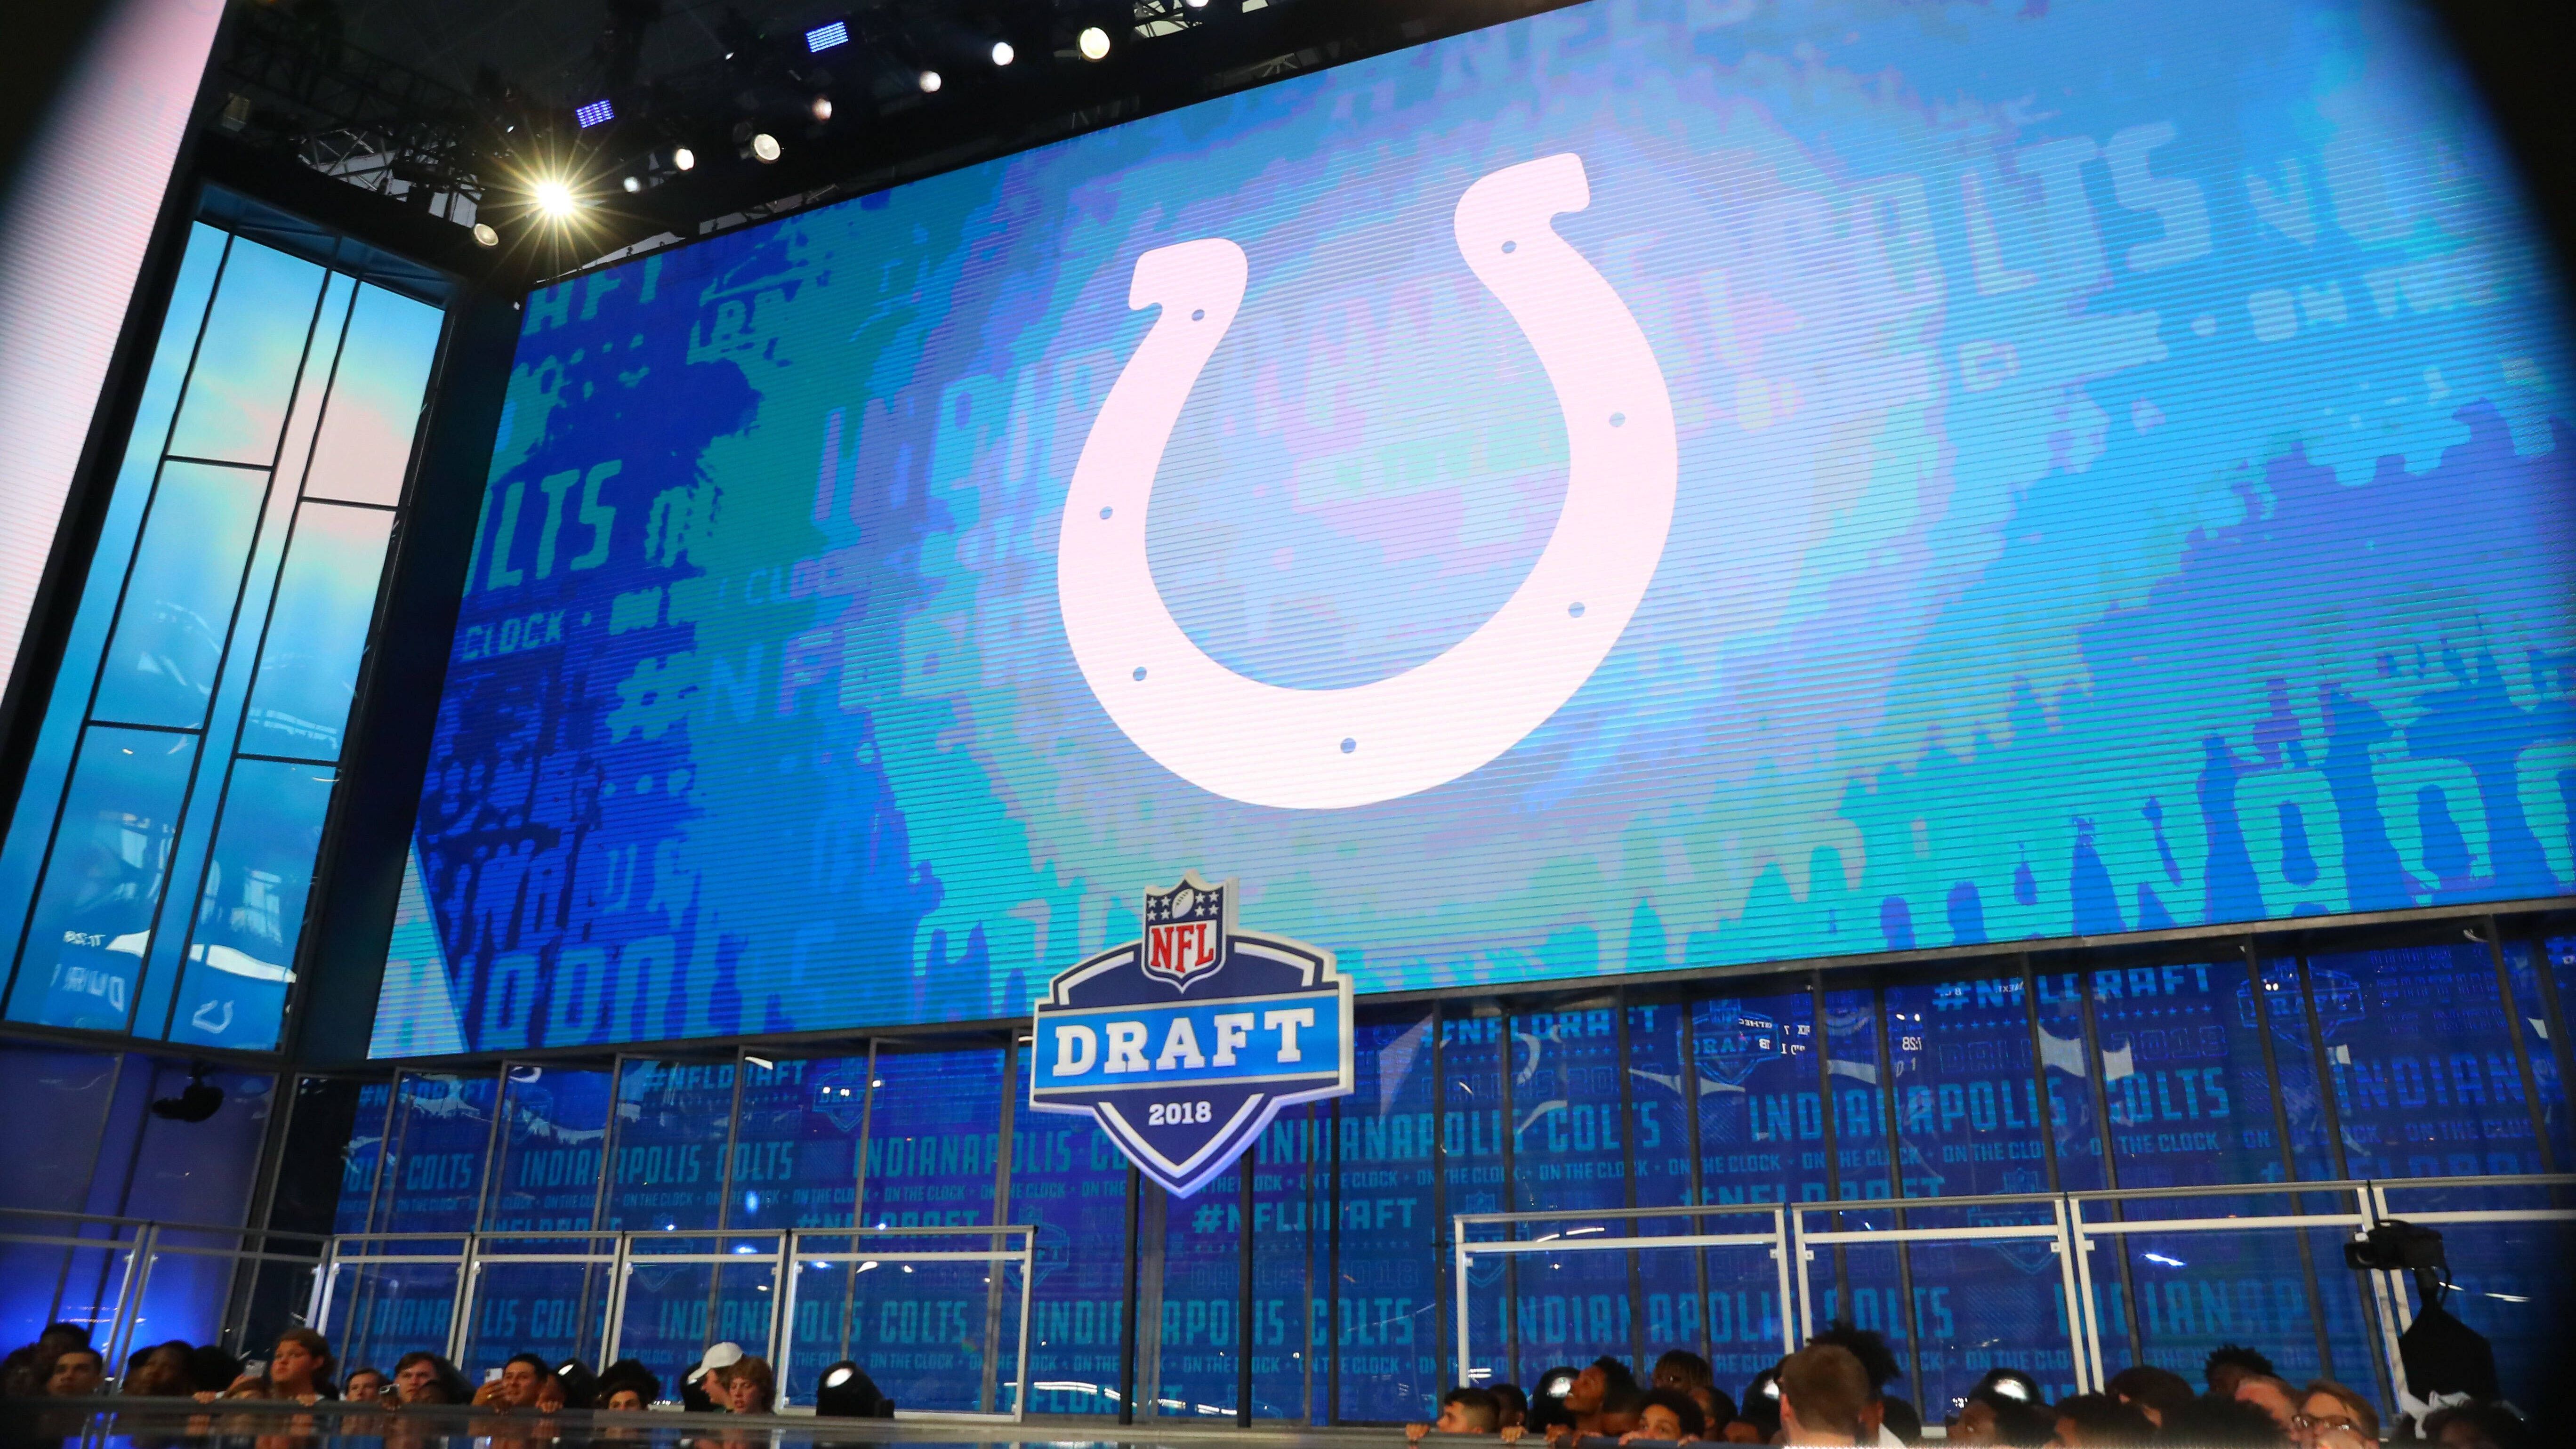 <strong>Platz 19:</strong> <strong>Indianapolis Colts - 5.071 Punkte<br></strong>1. Runde: 15 -&nbsp;1.628<br>2. Runde: 46 -&nbsp;1.060<br>3. Runde: 82 -&nbsp;767<br>4. Runde: 118 -&nbsp;582<br>5. Runde: 150 -&nbsp;461<br>6. Runde: 193 -&nbsp;333<br>7. Runde: 232 - 240<br><br>Draft-Wert insgesamt: 5.071 Punkte